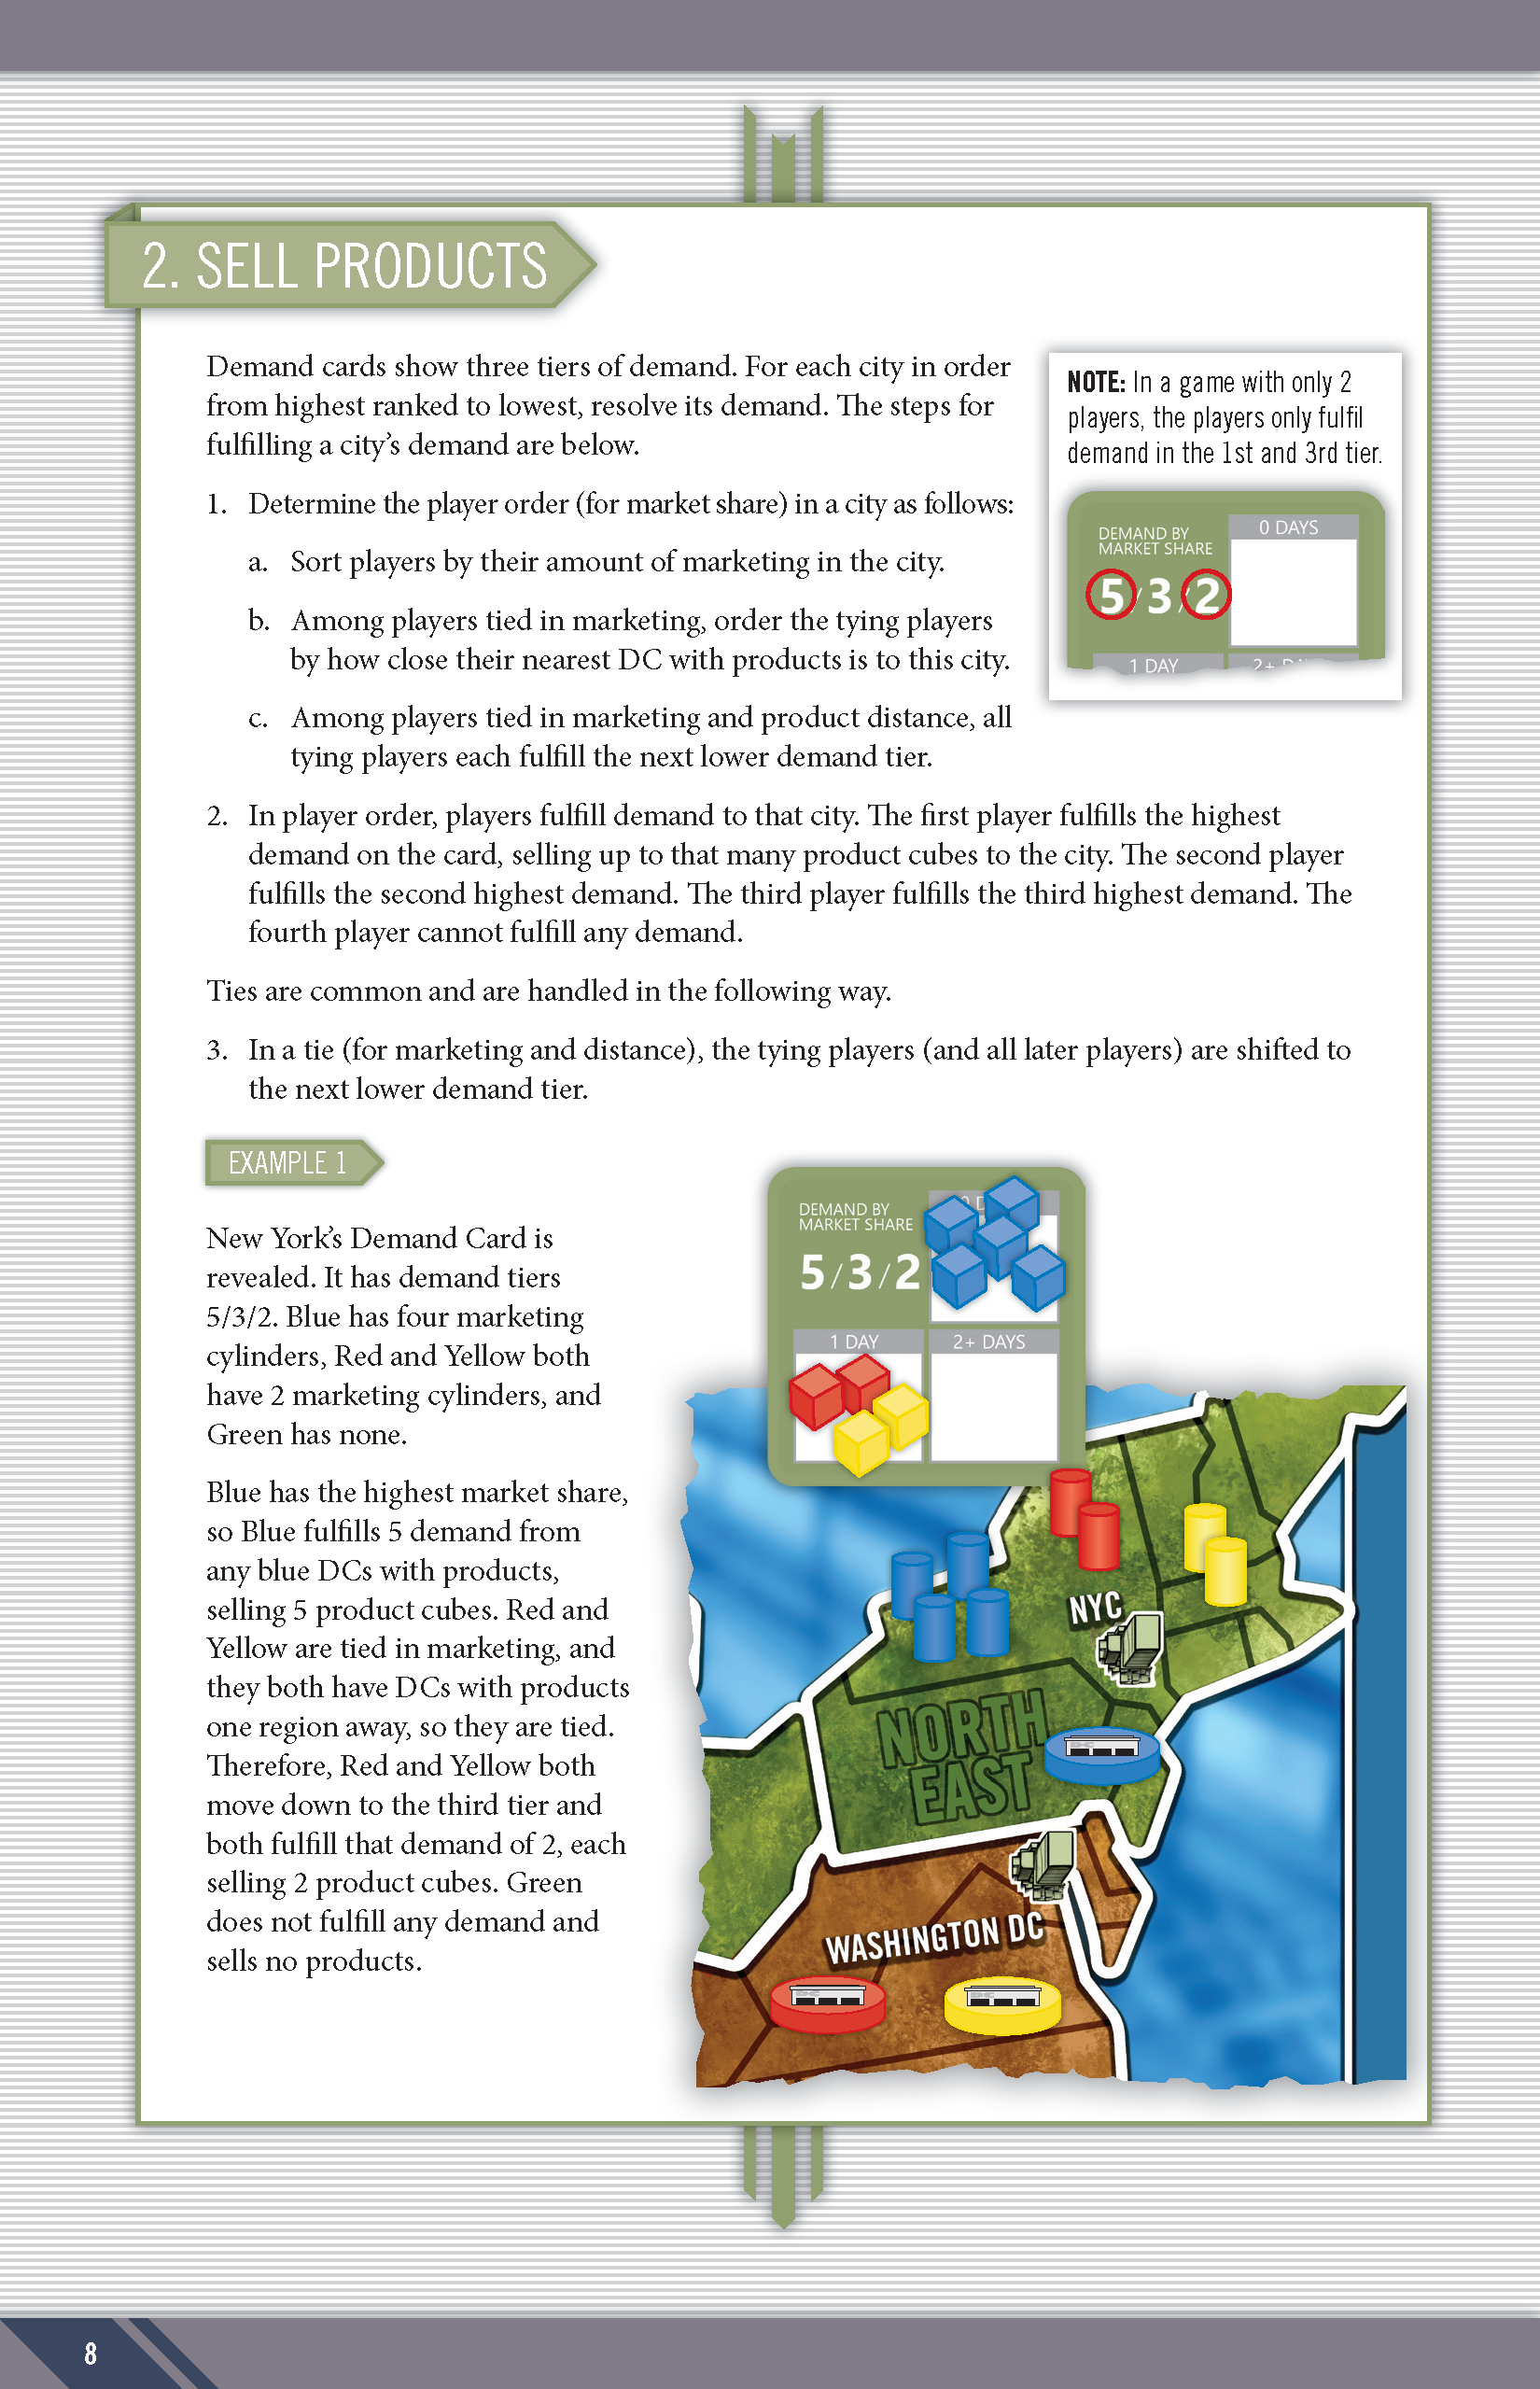 Emergent Rulebook_final_cropped_Page_08